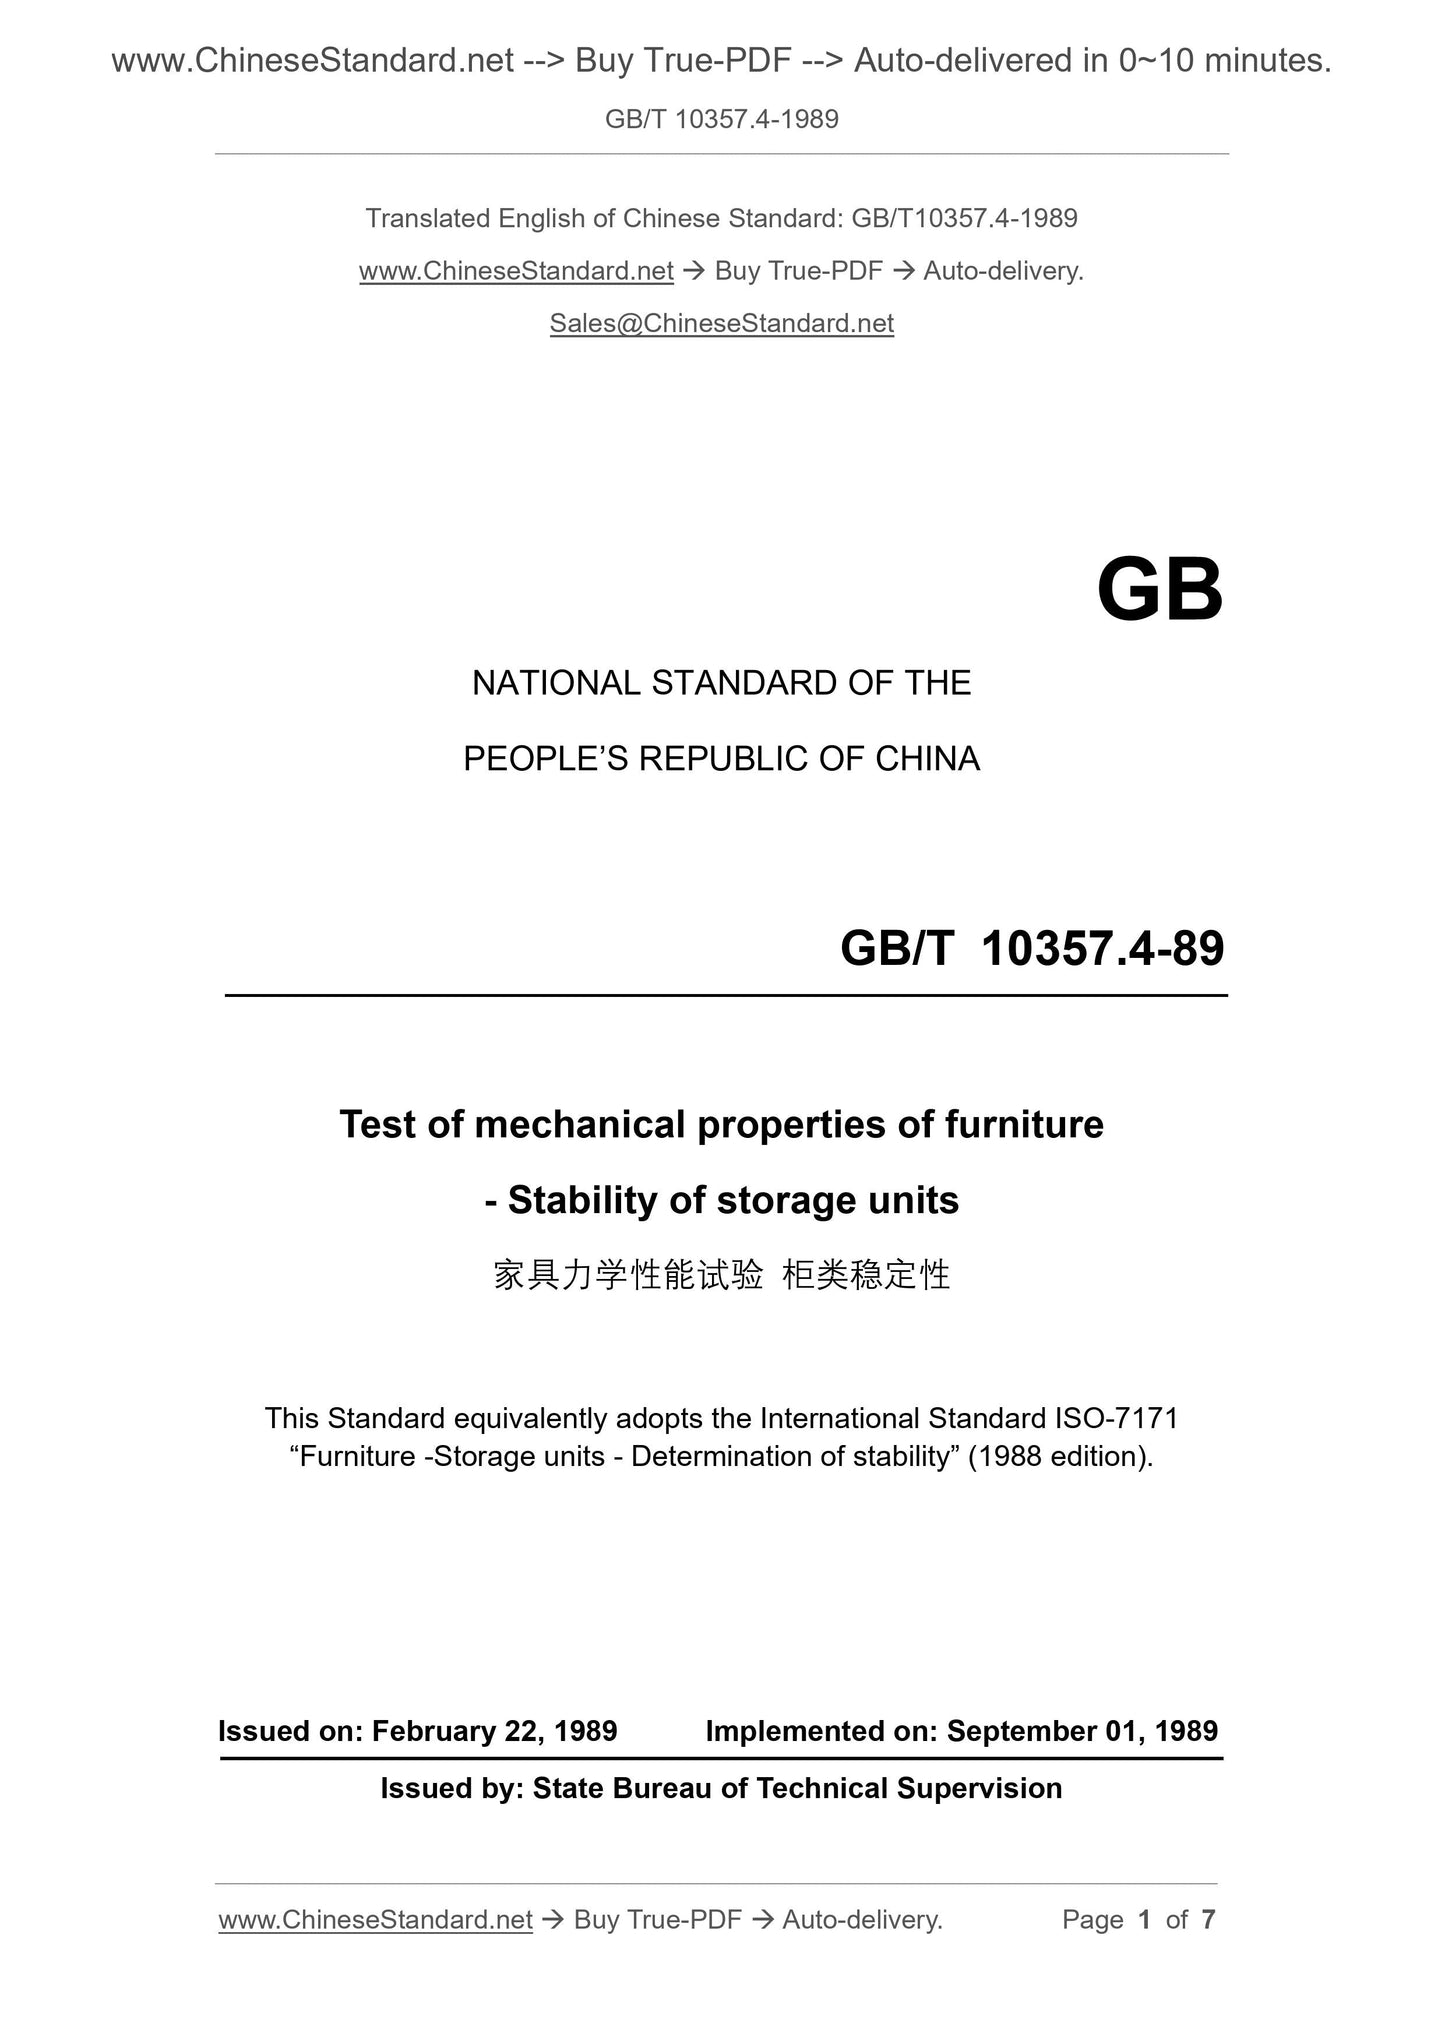 GB/T 10357.4-1989 Page 1